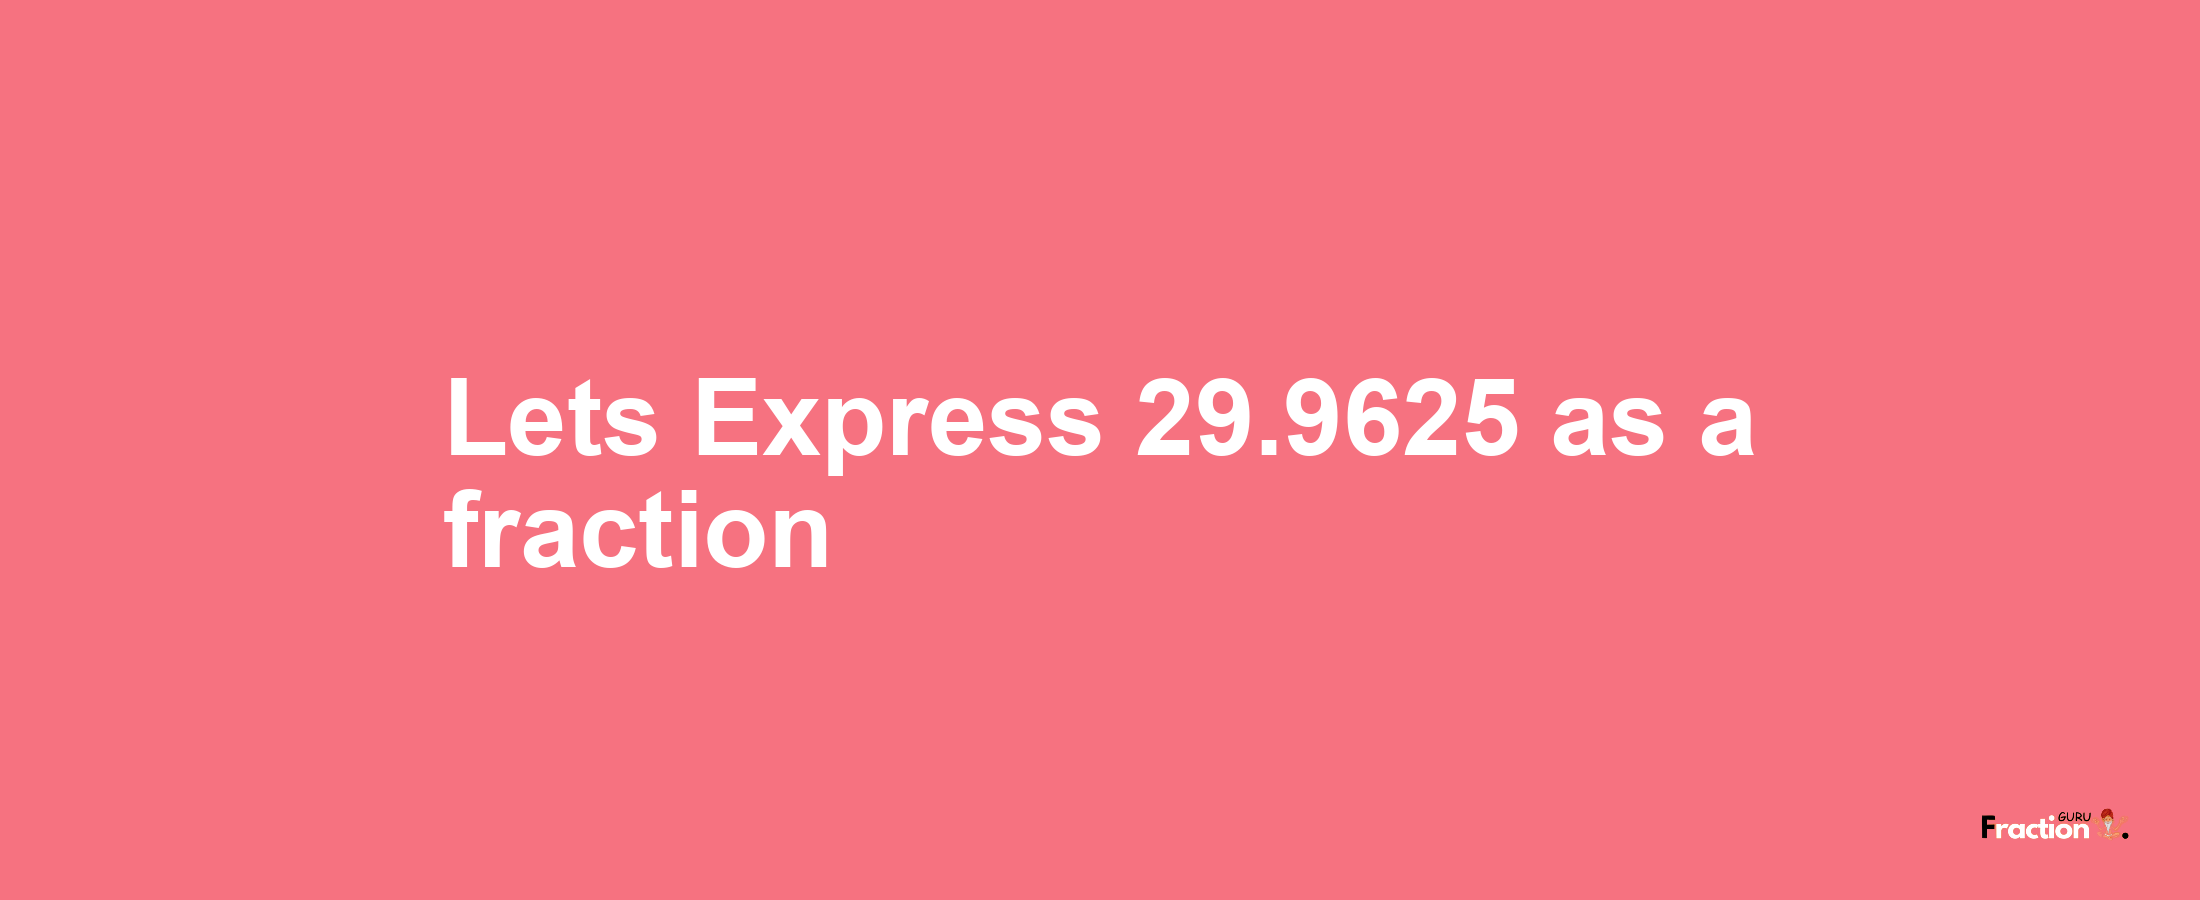 Lets Express 29.9625 as afraction